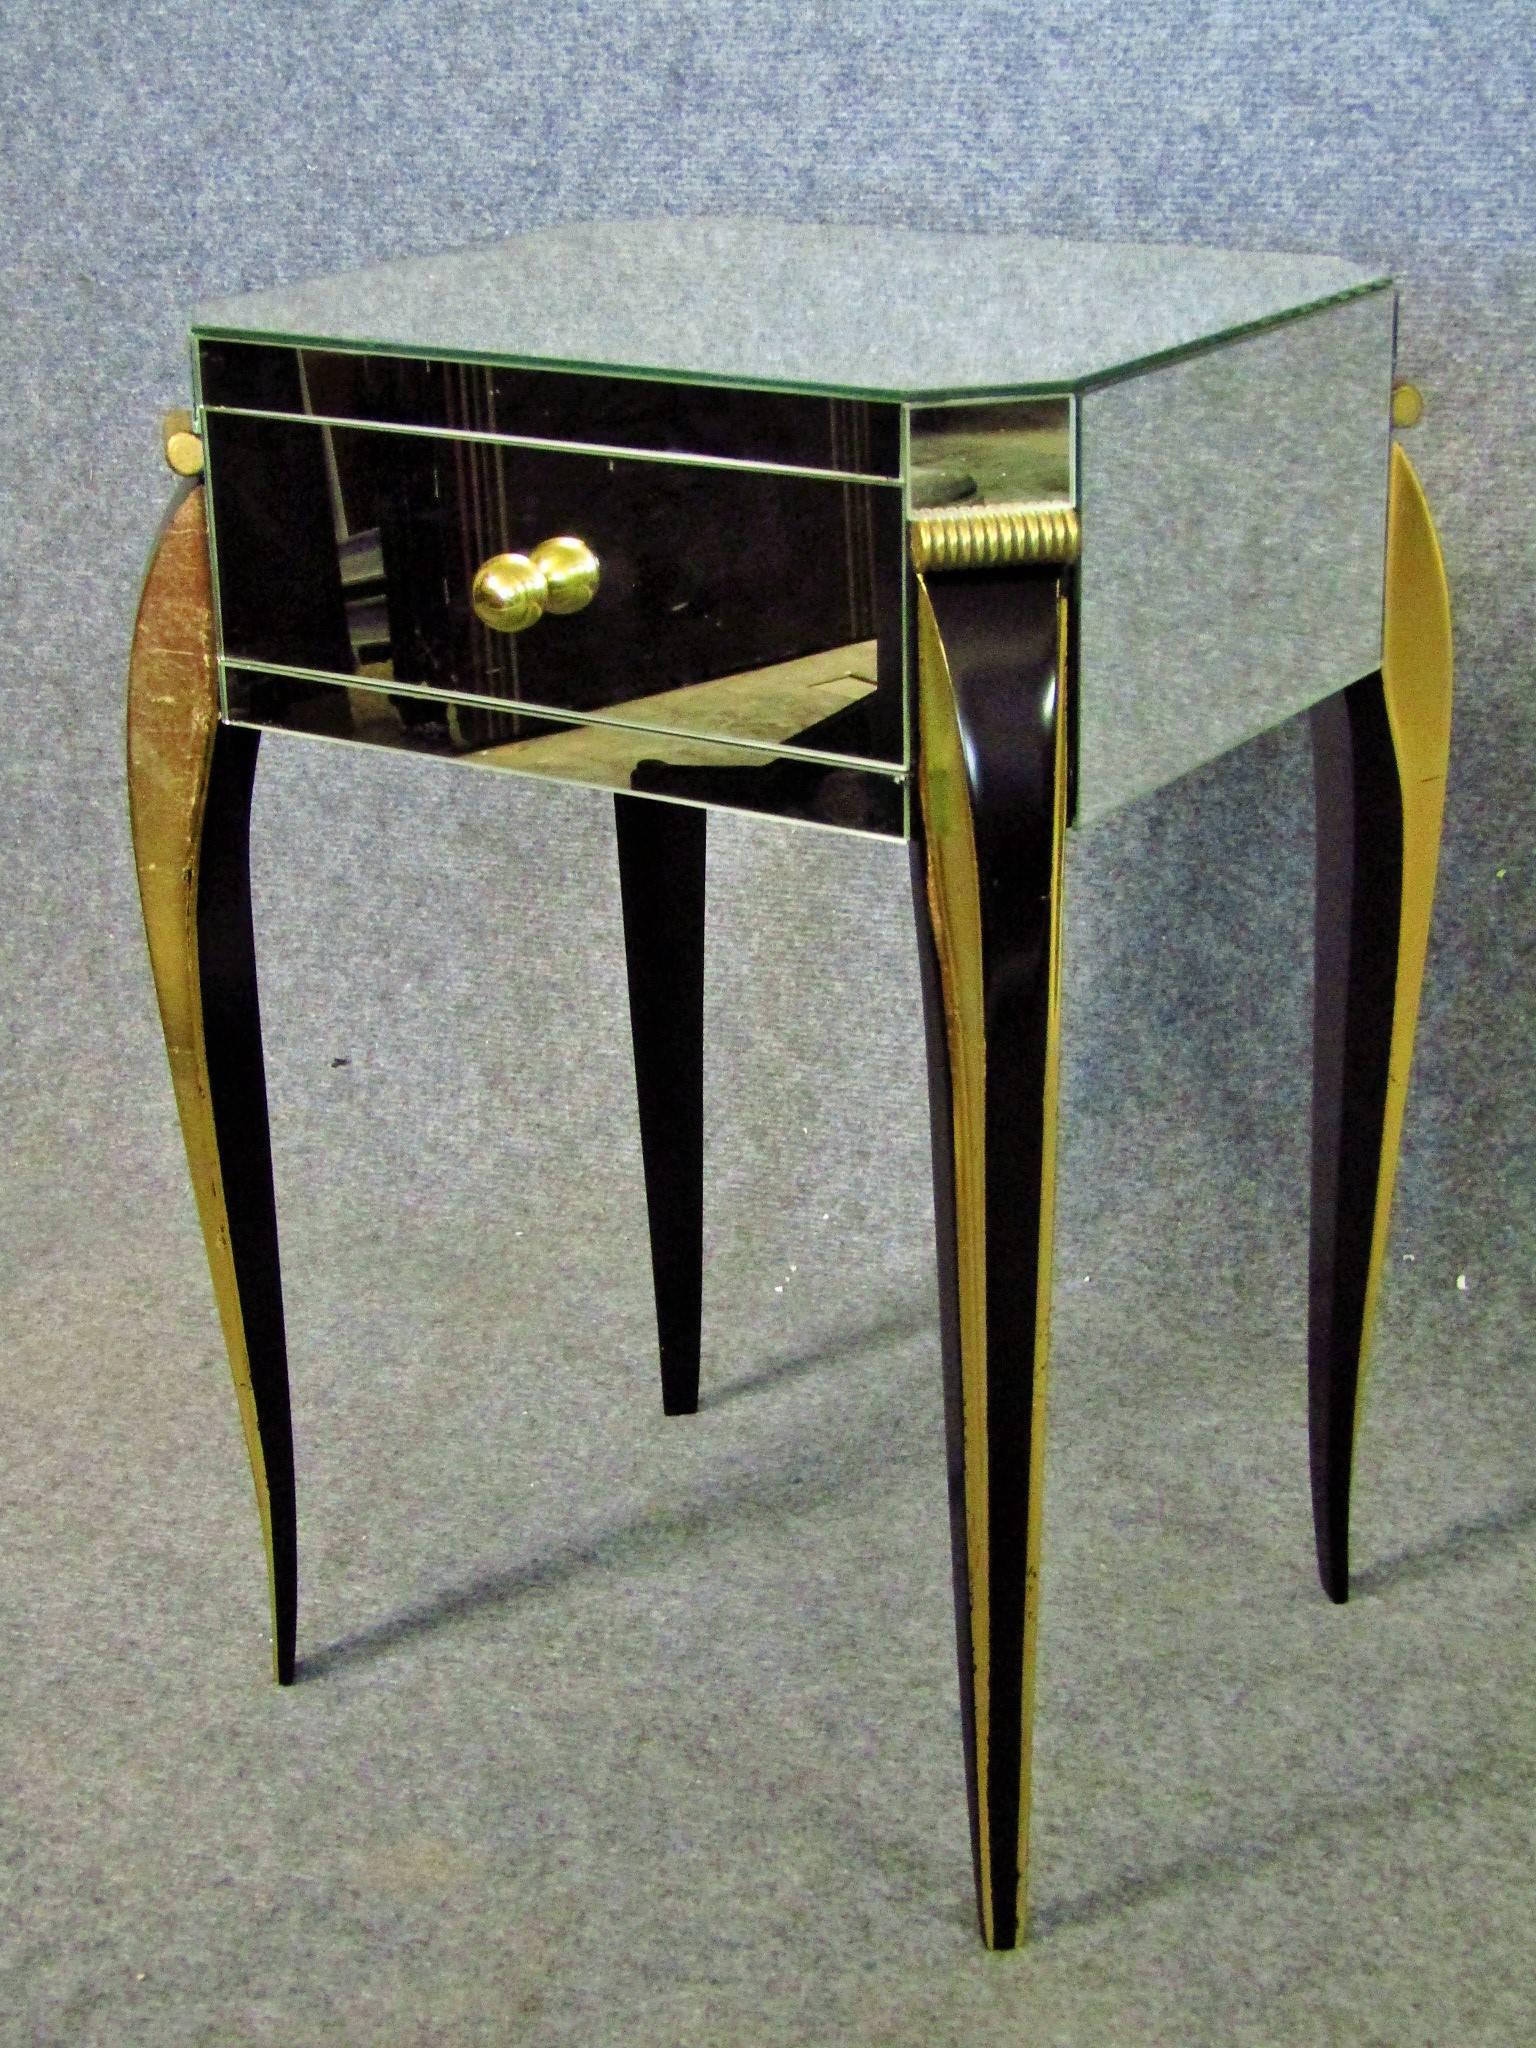 Mid-20th Century Mirrored Art Deco Side Table in the Style of Arbus, France, 1930